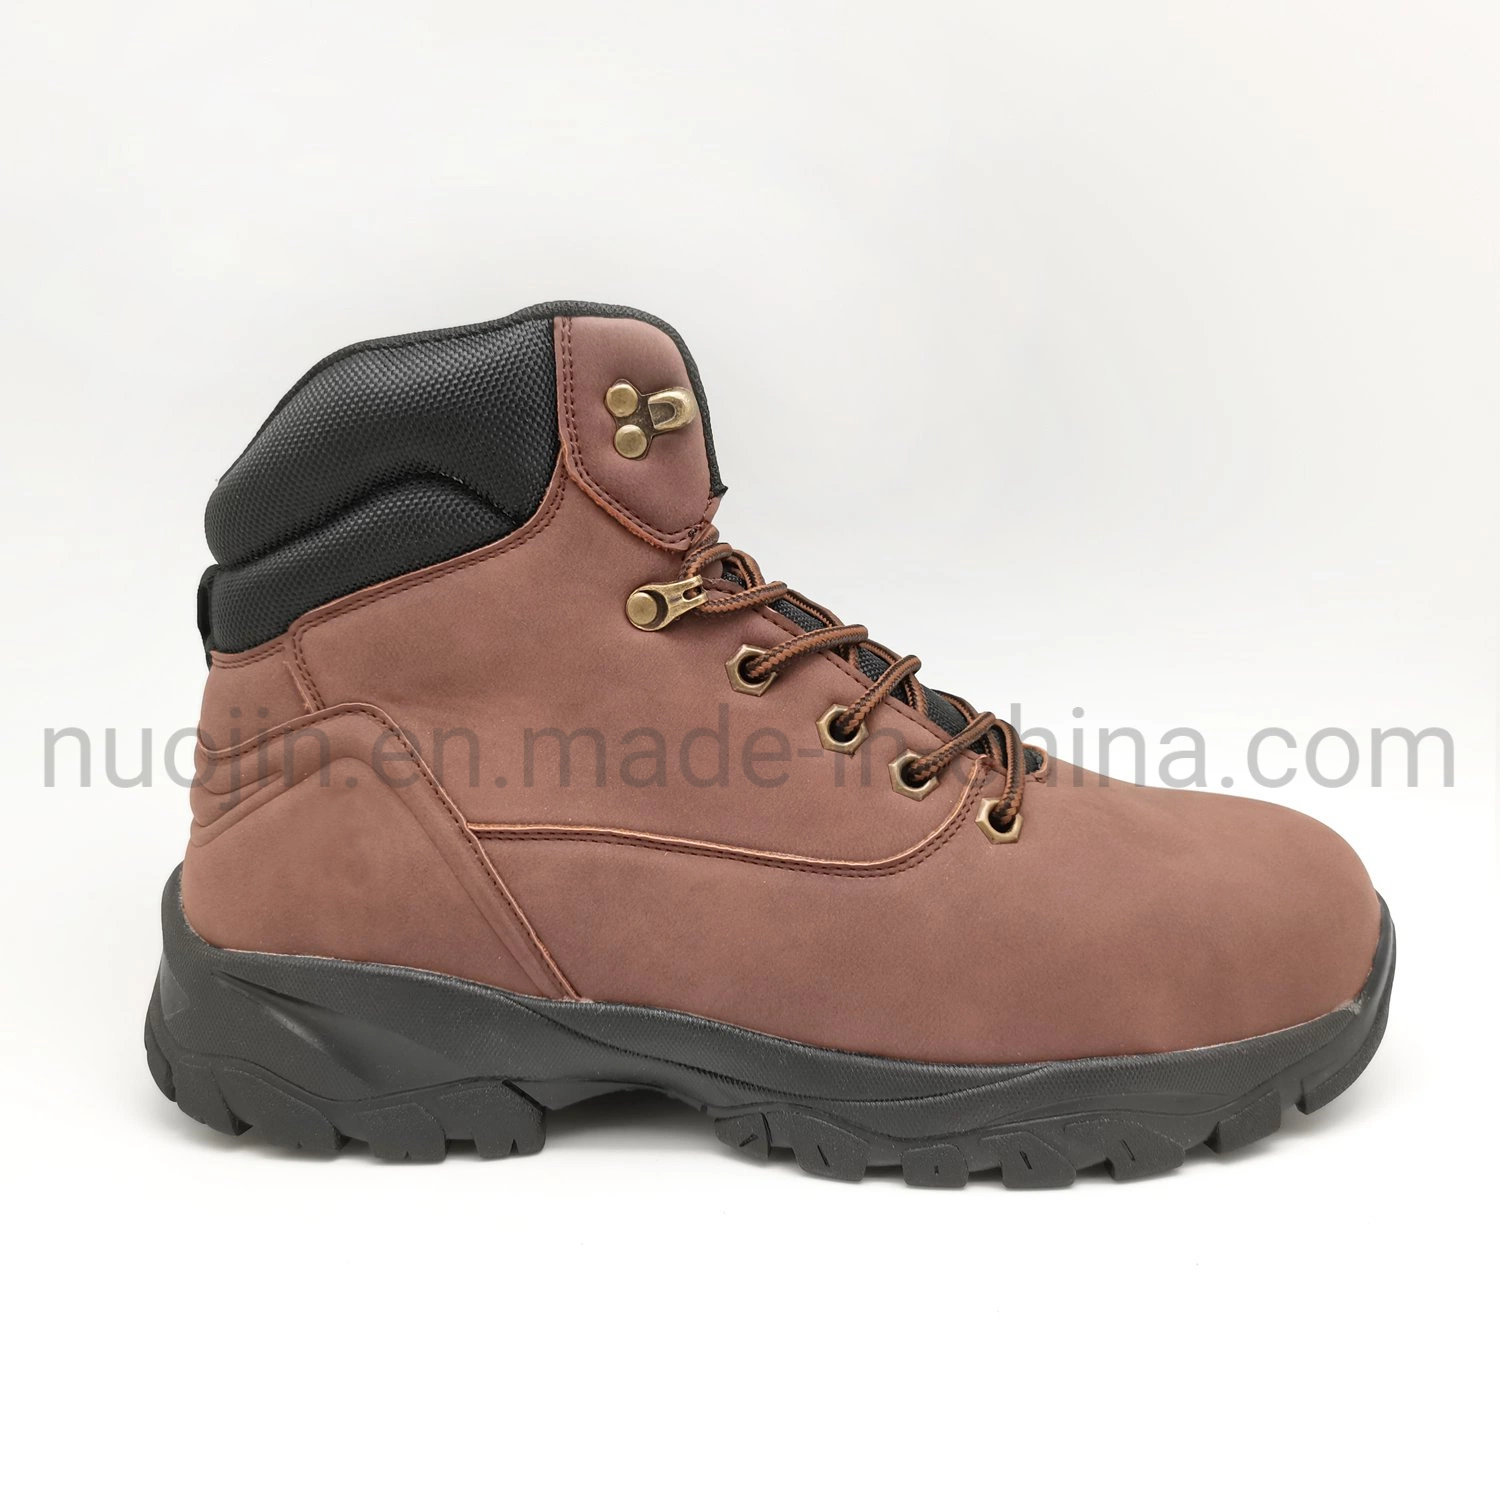 PU Leather Anti Slip Wearable Outdoor Safety Work Boot Hiking Shoes for Men